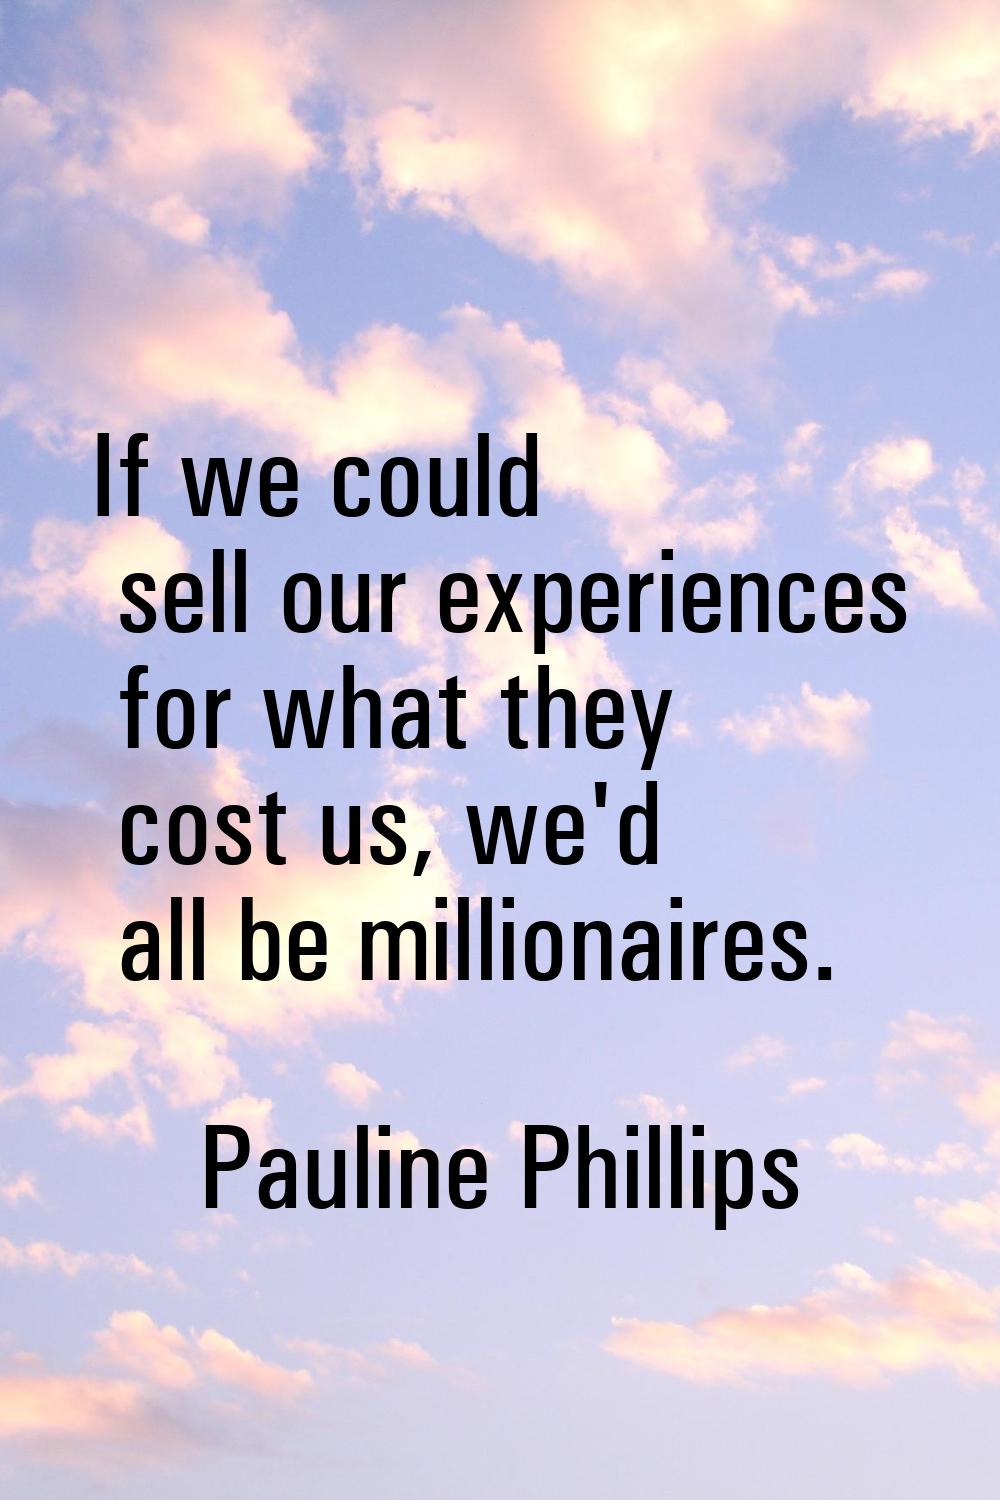 If we could sell our experiences for what they cost us, we'd all be millionaires.